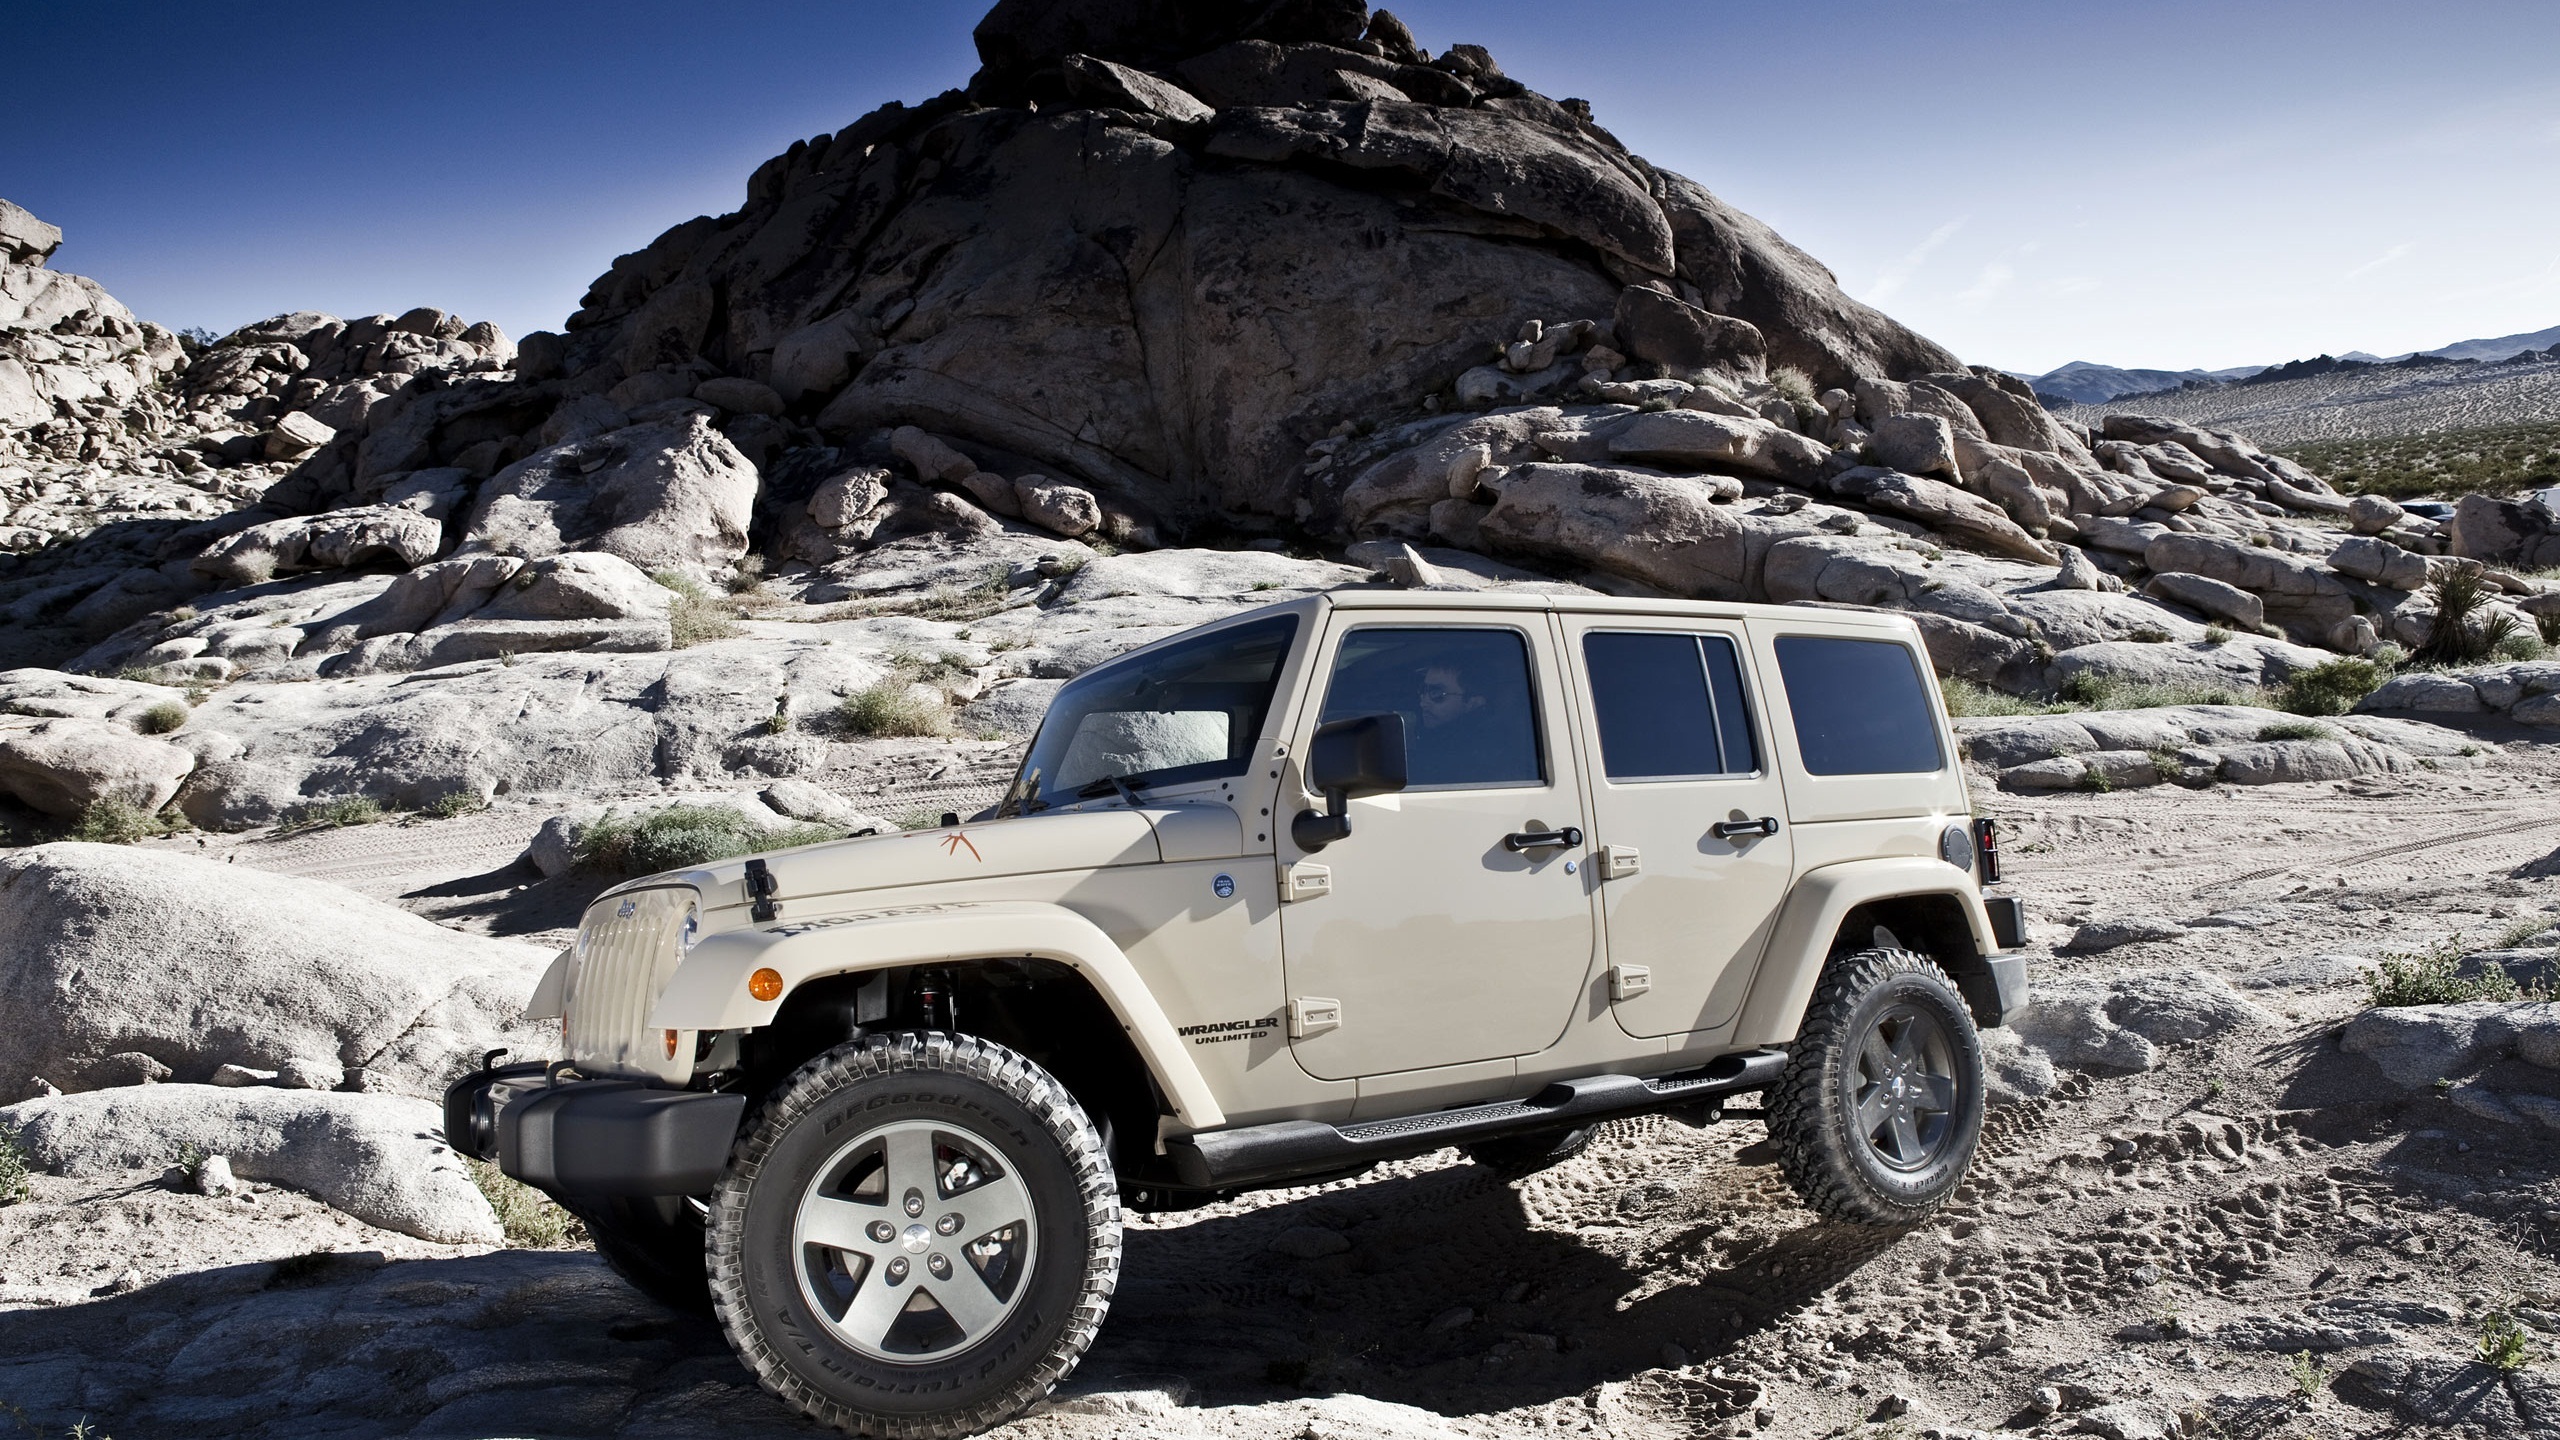 Gorgeous Jeep Wrangler Wallpaper Full HD Pictures